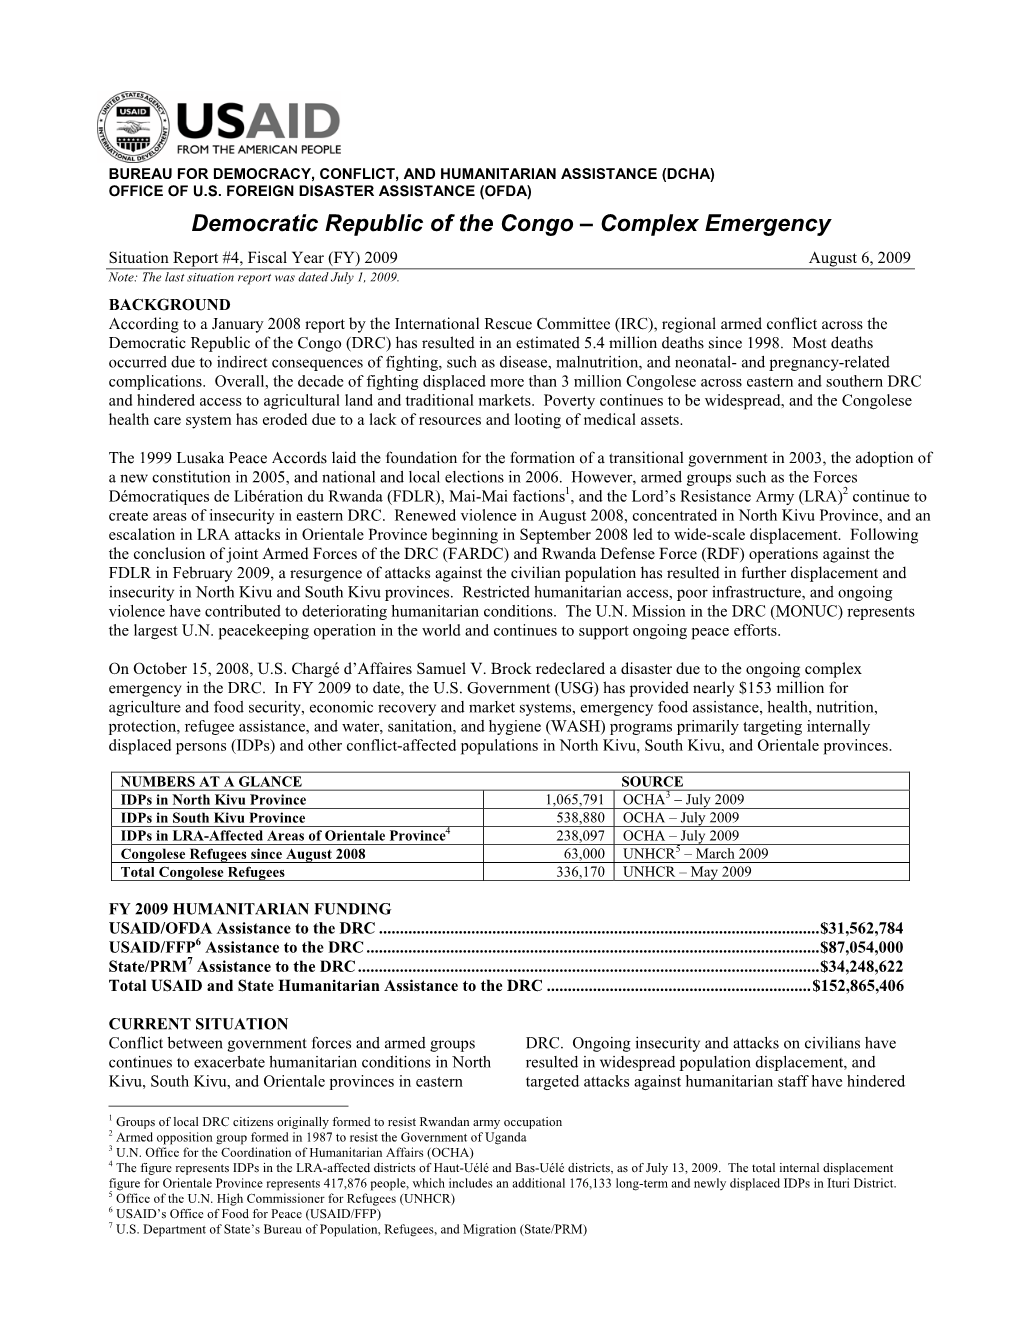 DRC Complex Emergency Situation Report #4 8/6/2009